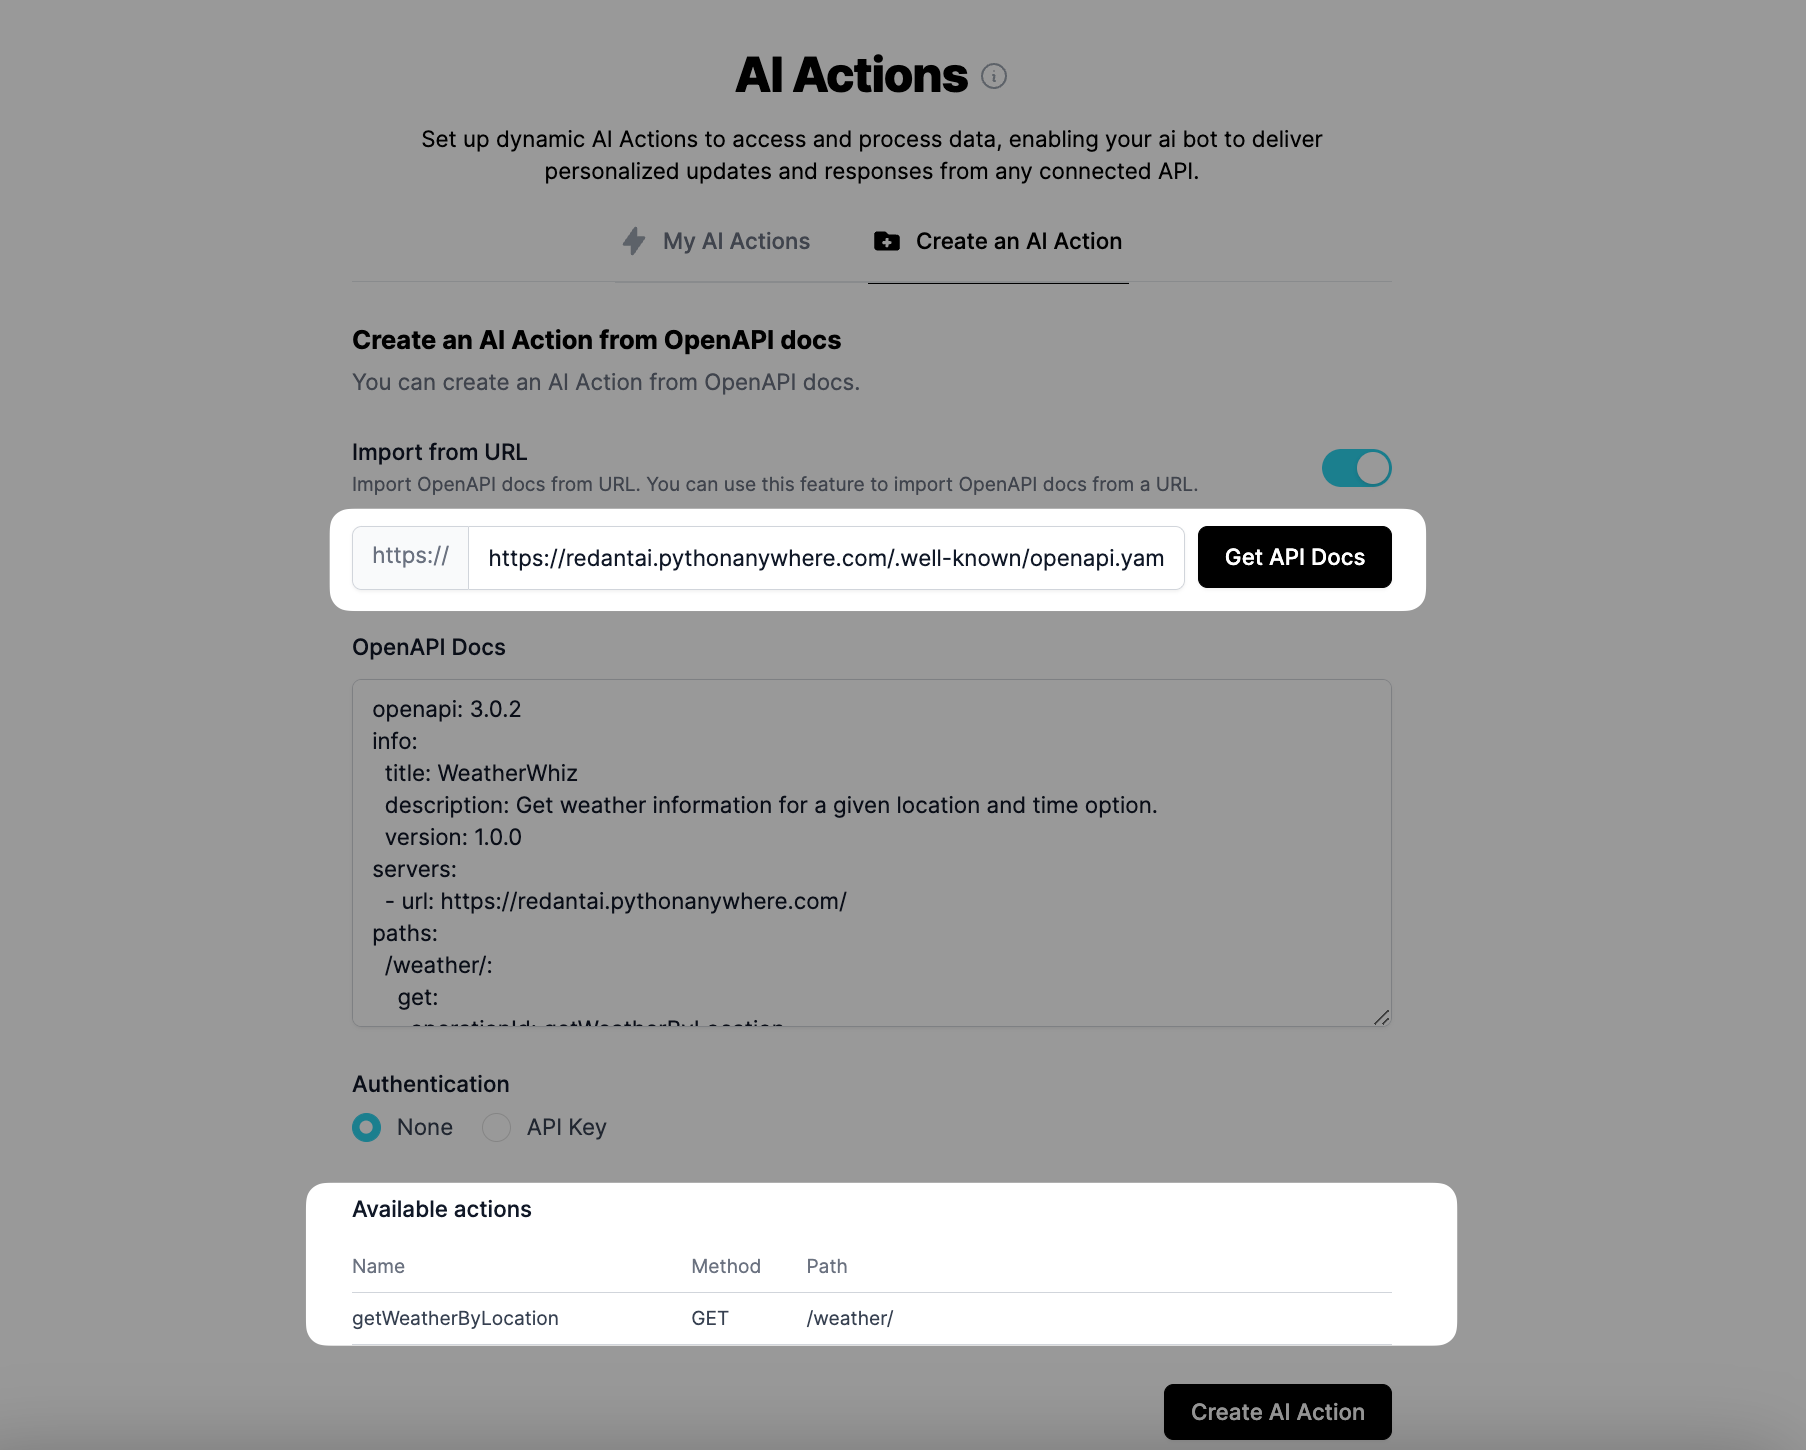 showing available actions coming from the open api documentation in LiveChatAI